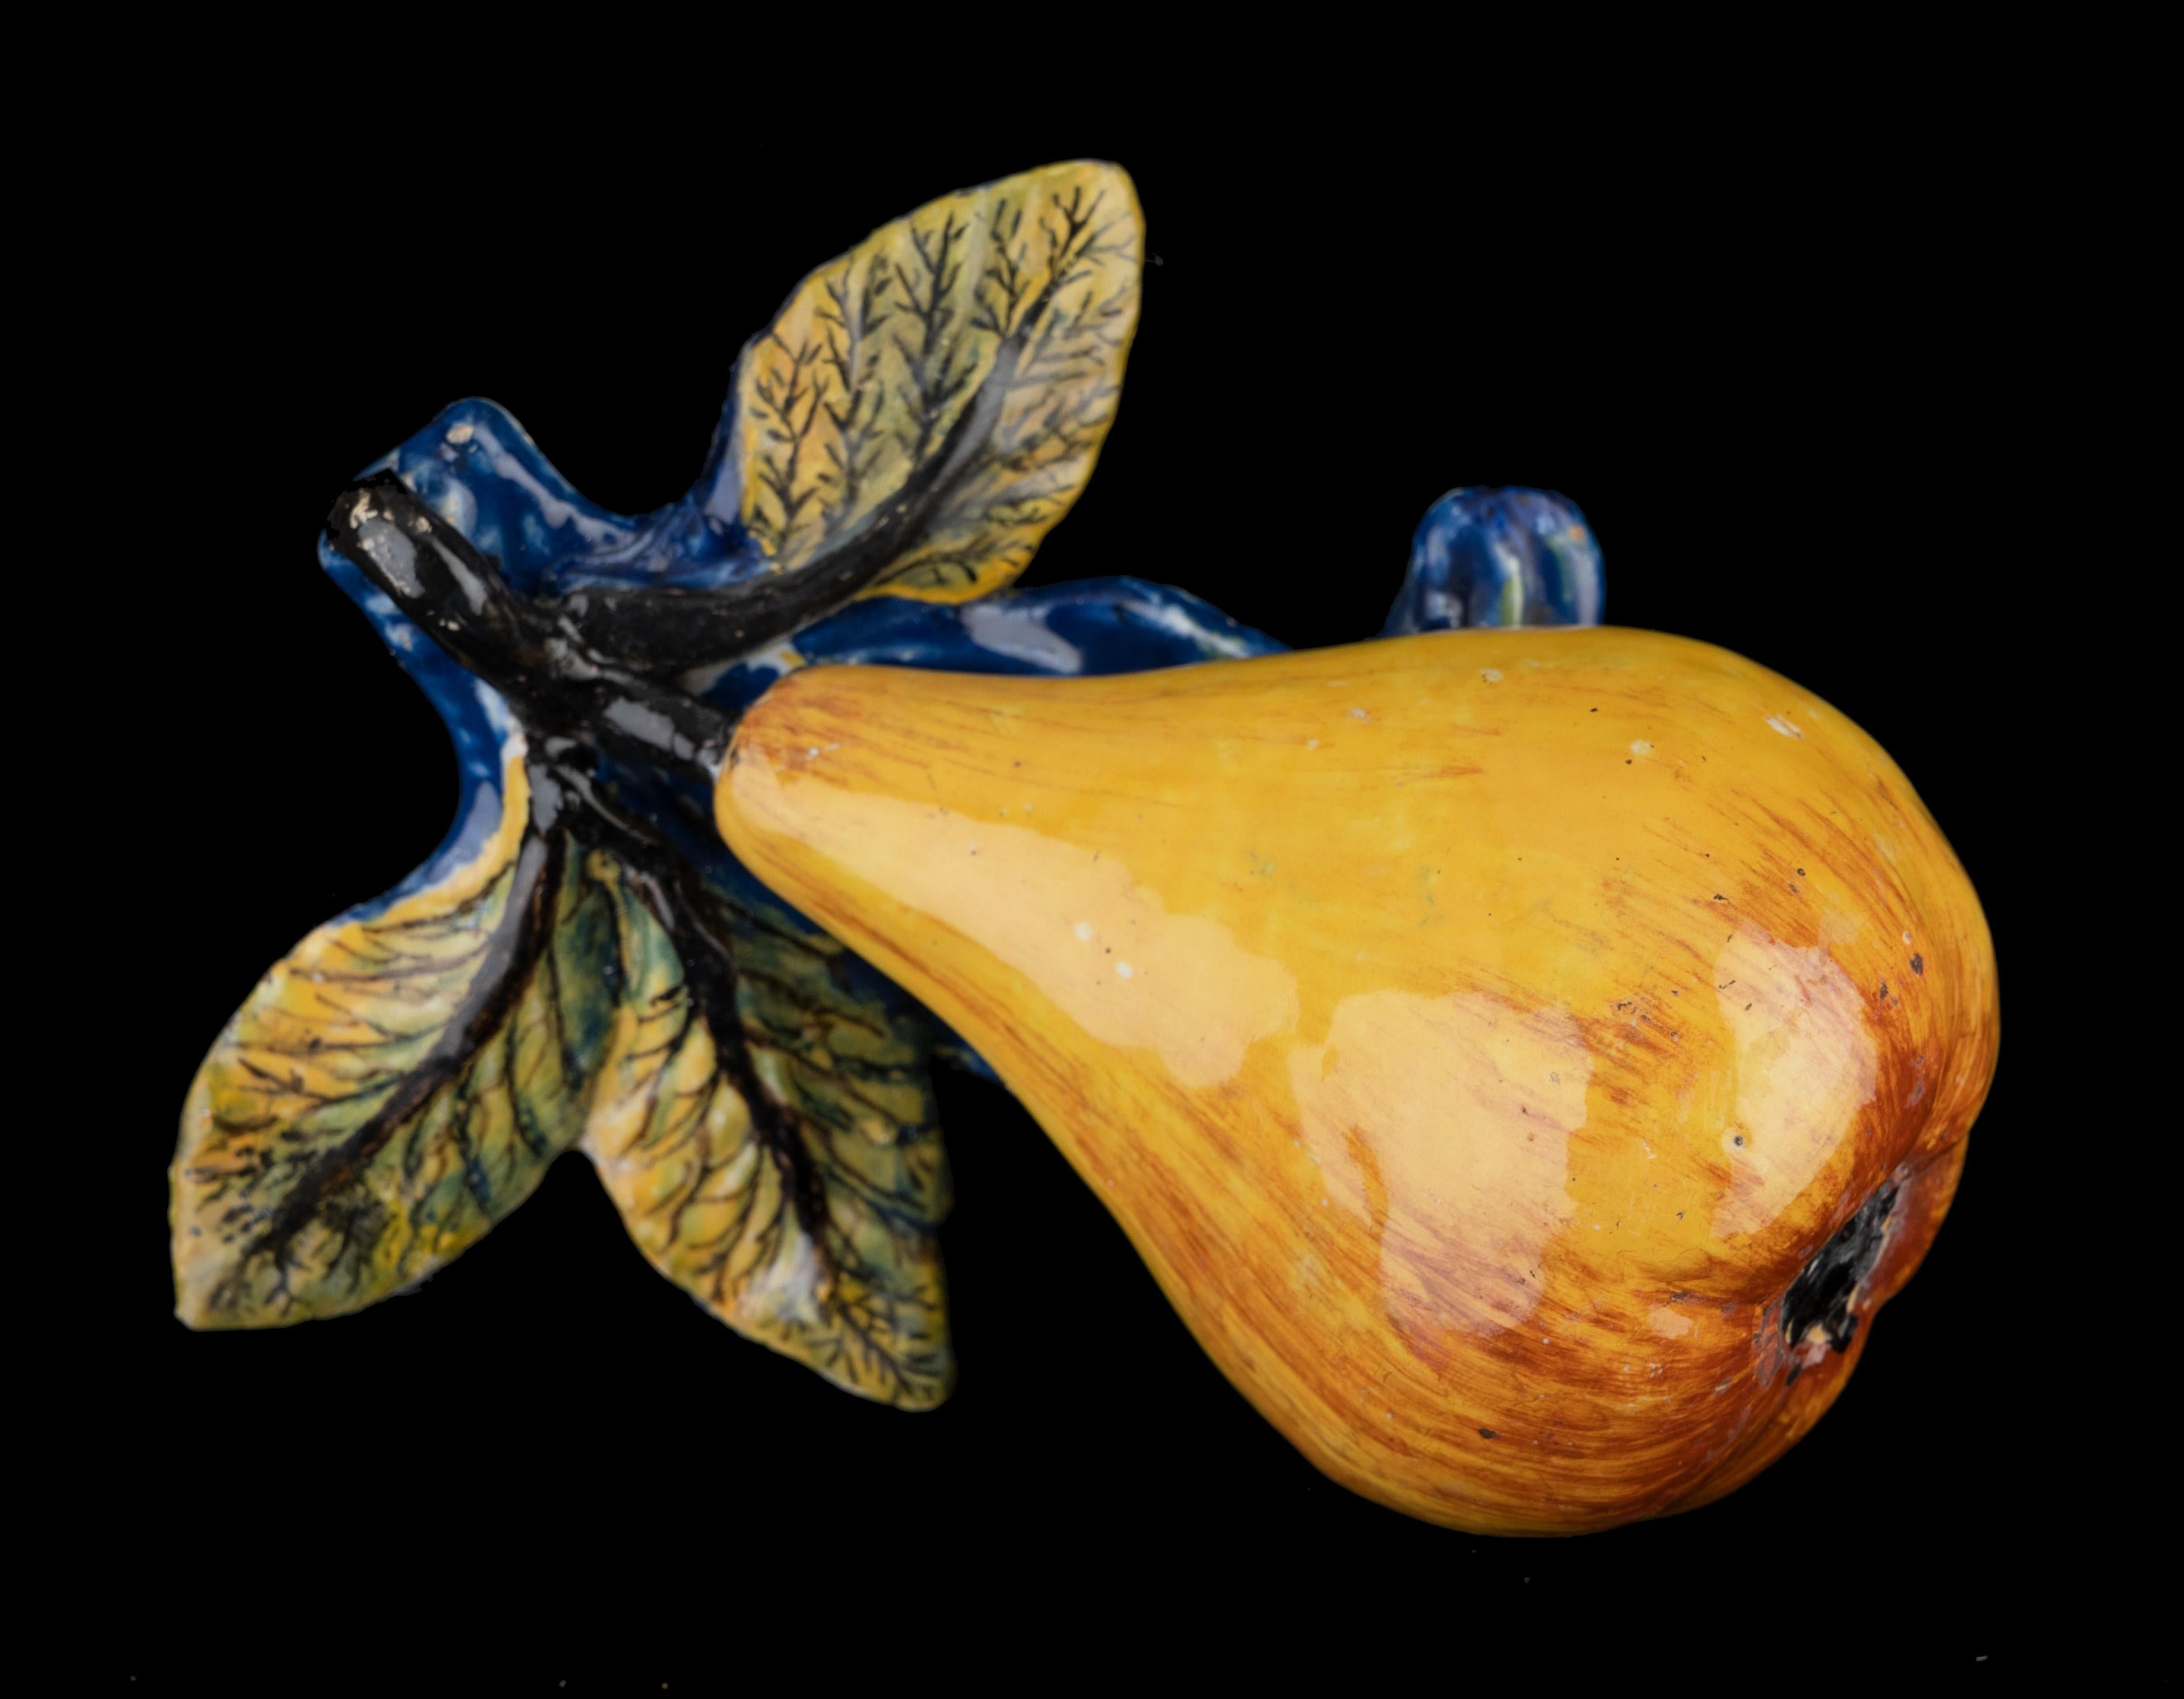 Dutch delftware Pear. Delft, 1750-1780

The pear with stem is modelled on a base of leaves and is painted in realistic colours. 

Dimensions: height 7 cm / 2.75 in., length 12 cm / 4.72 in., width 9 cm / 3.54 in.

Figurines of fruit were